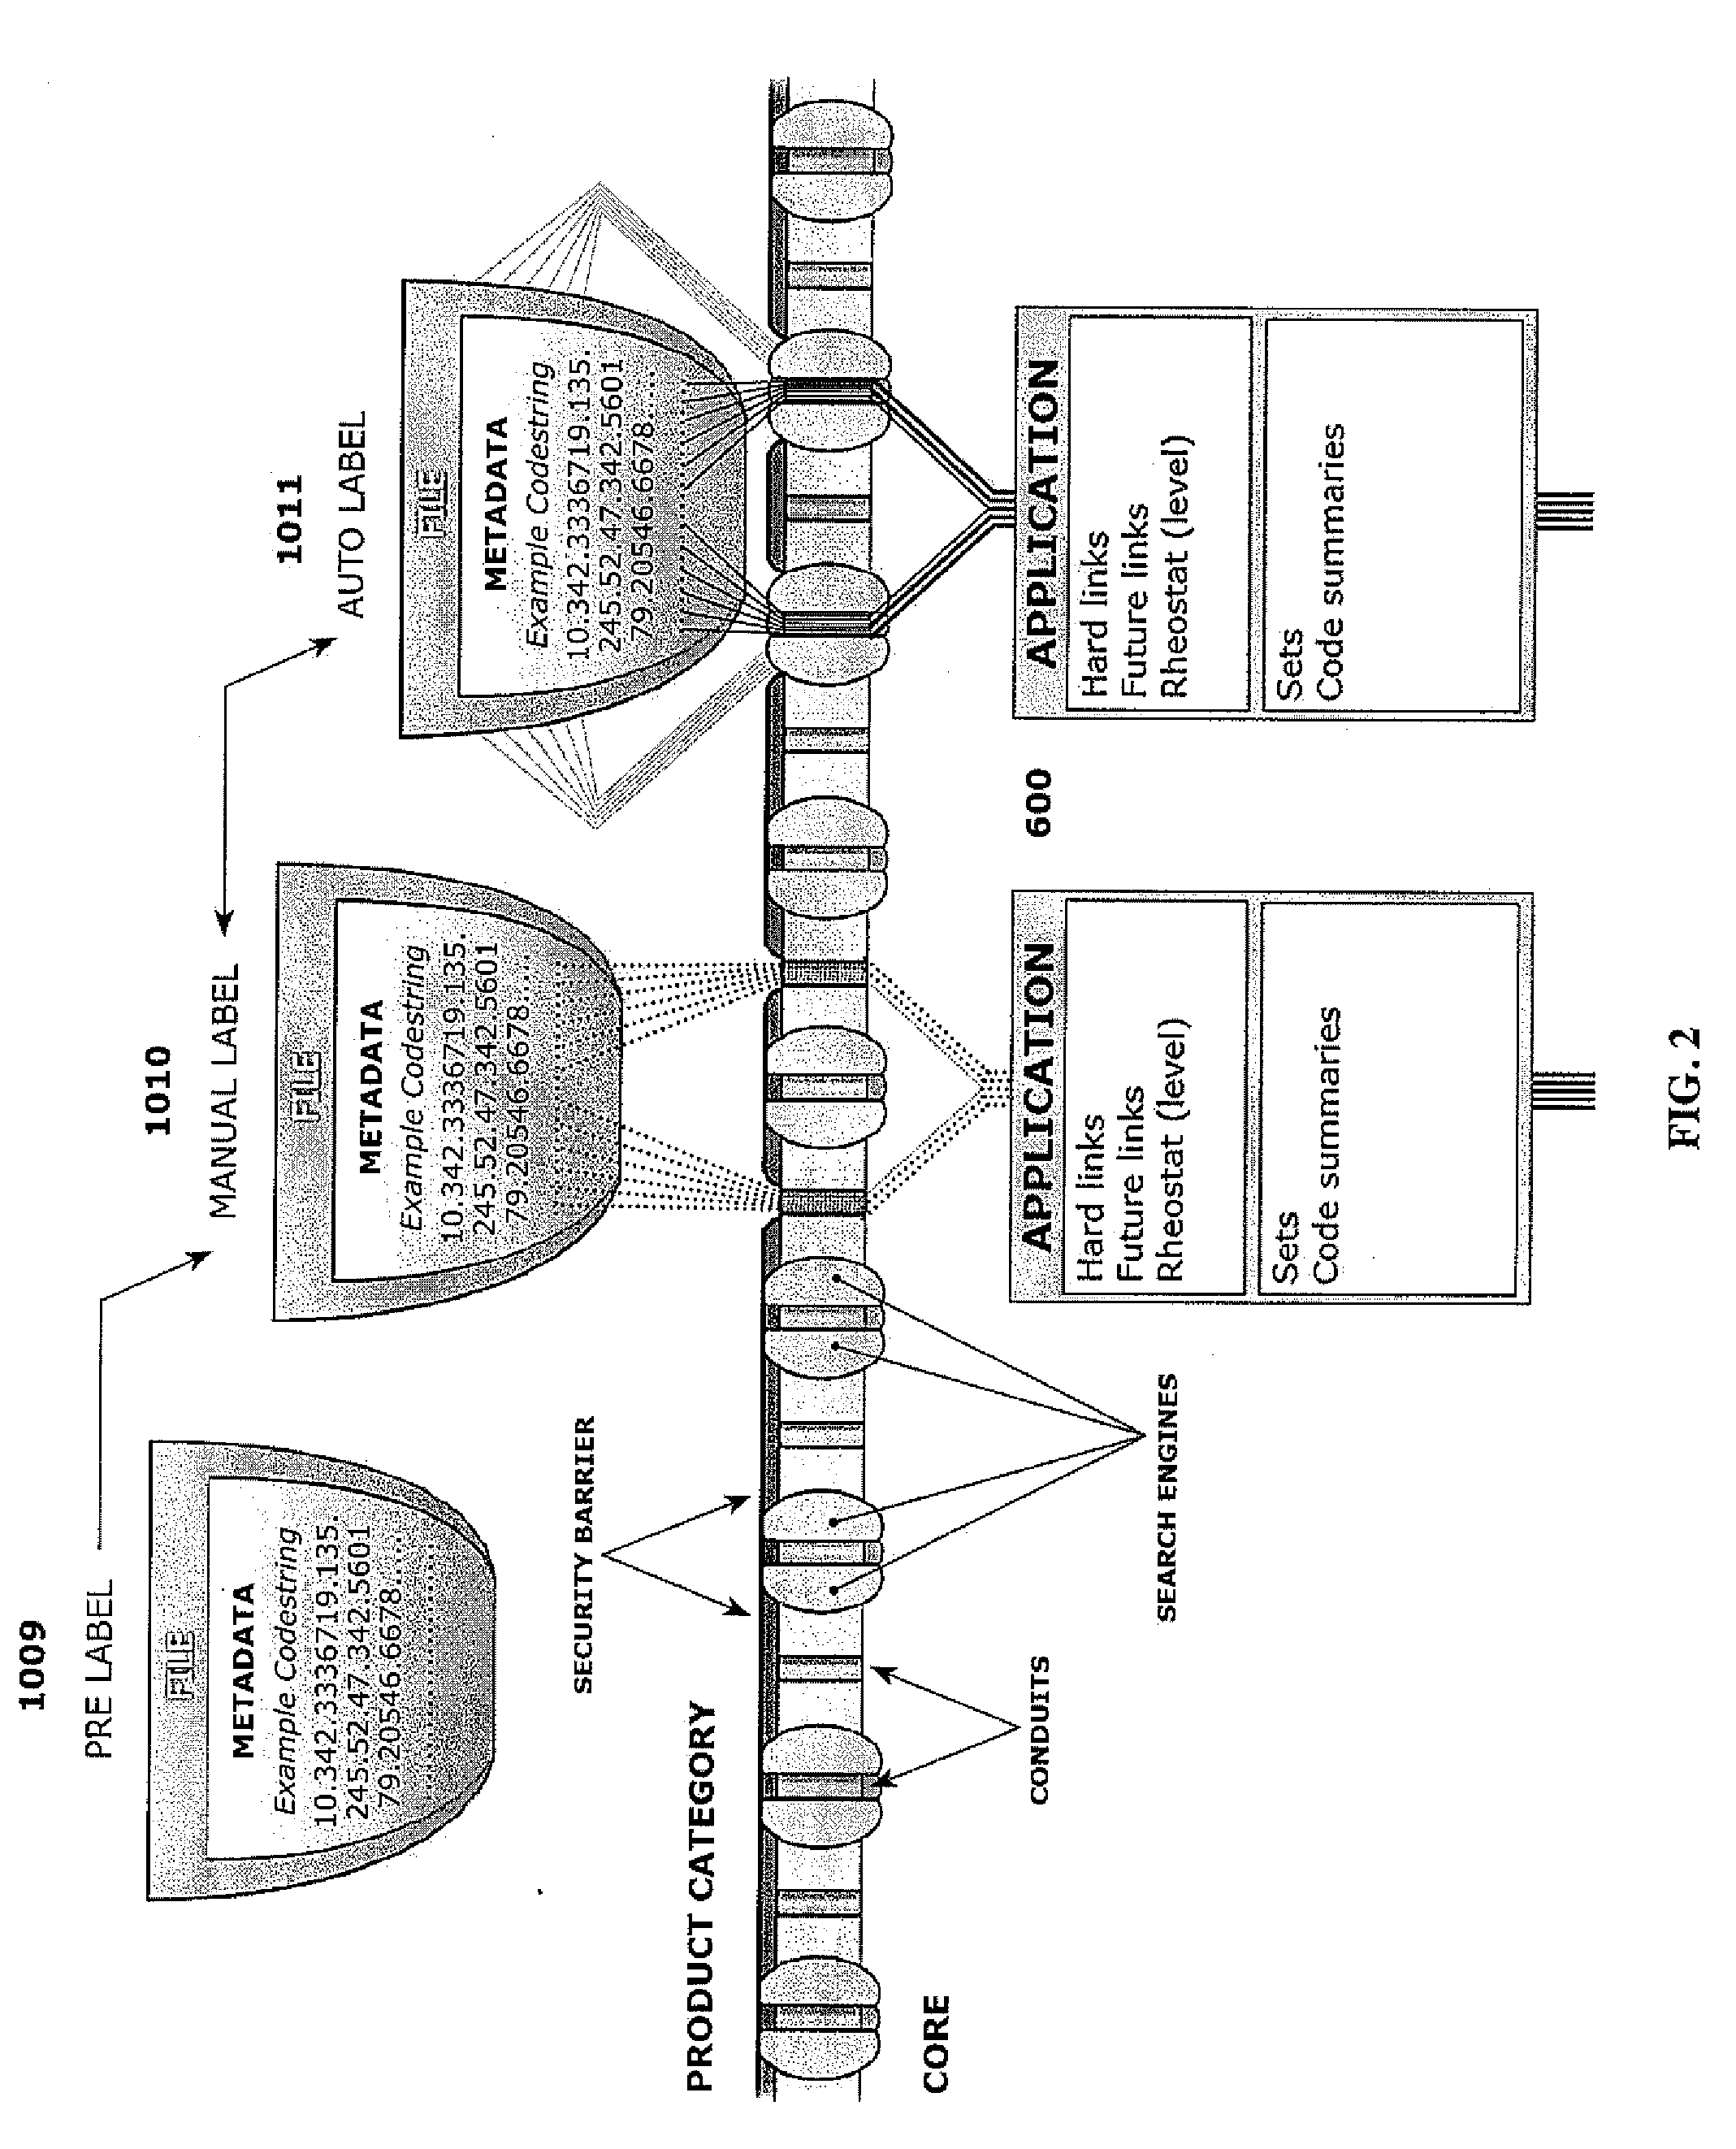 Method and System for Creating and Utilizing a Metadata Apparatus for Management Applications